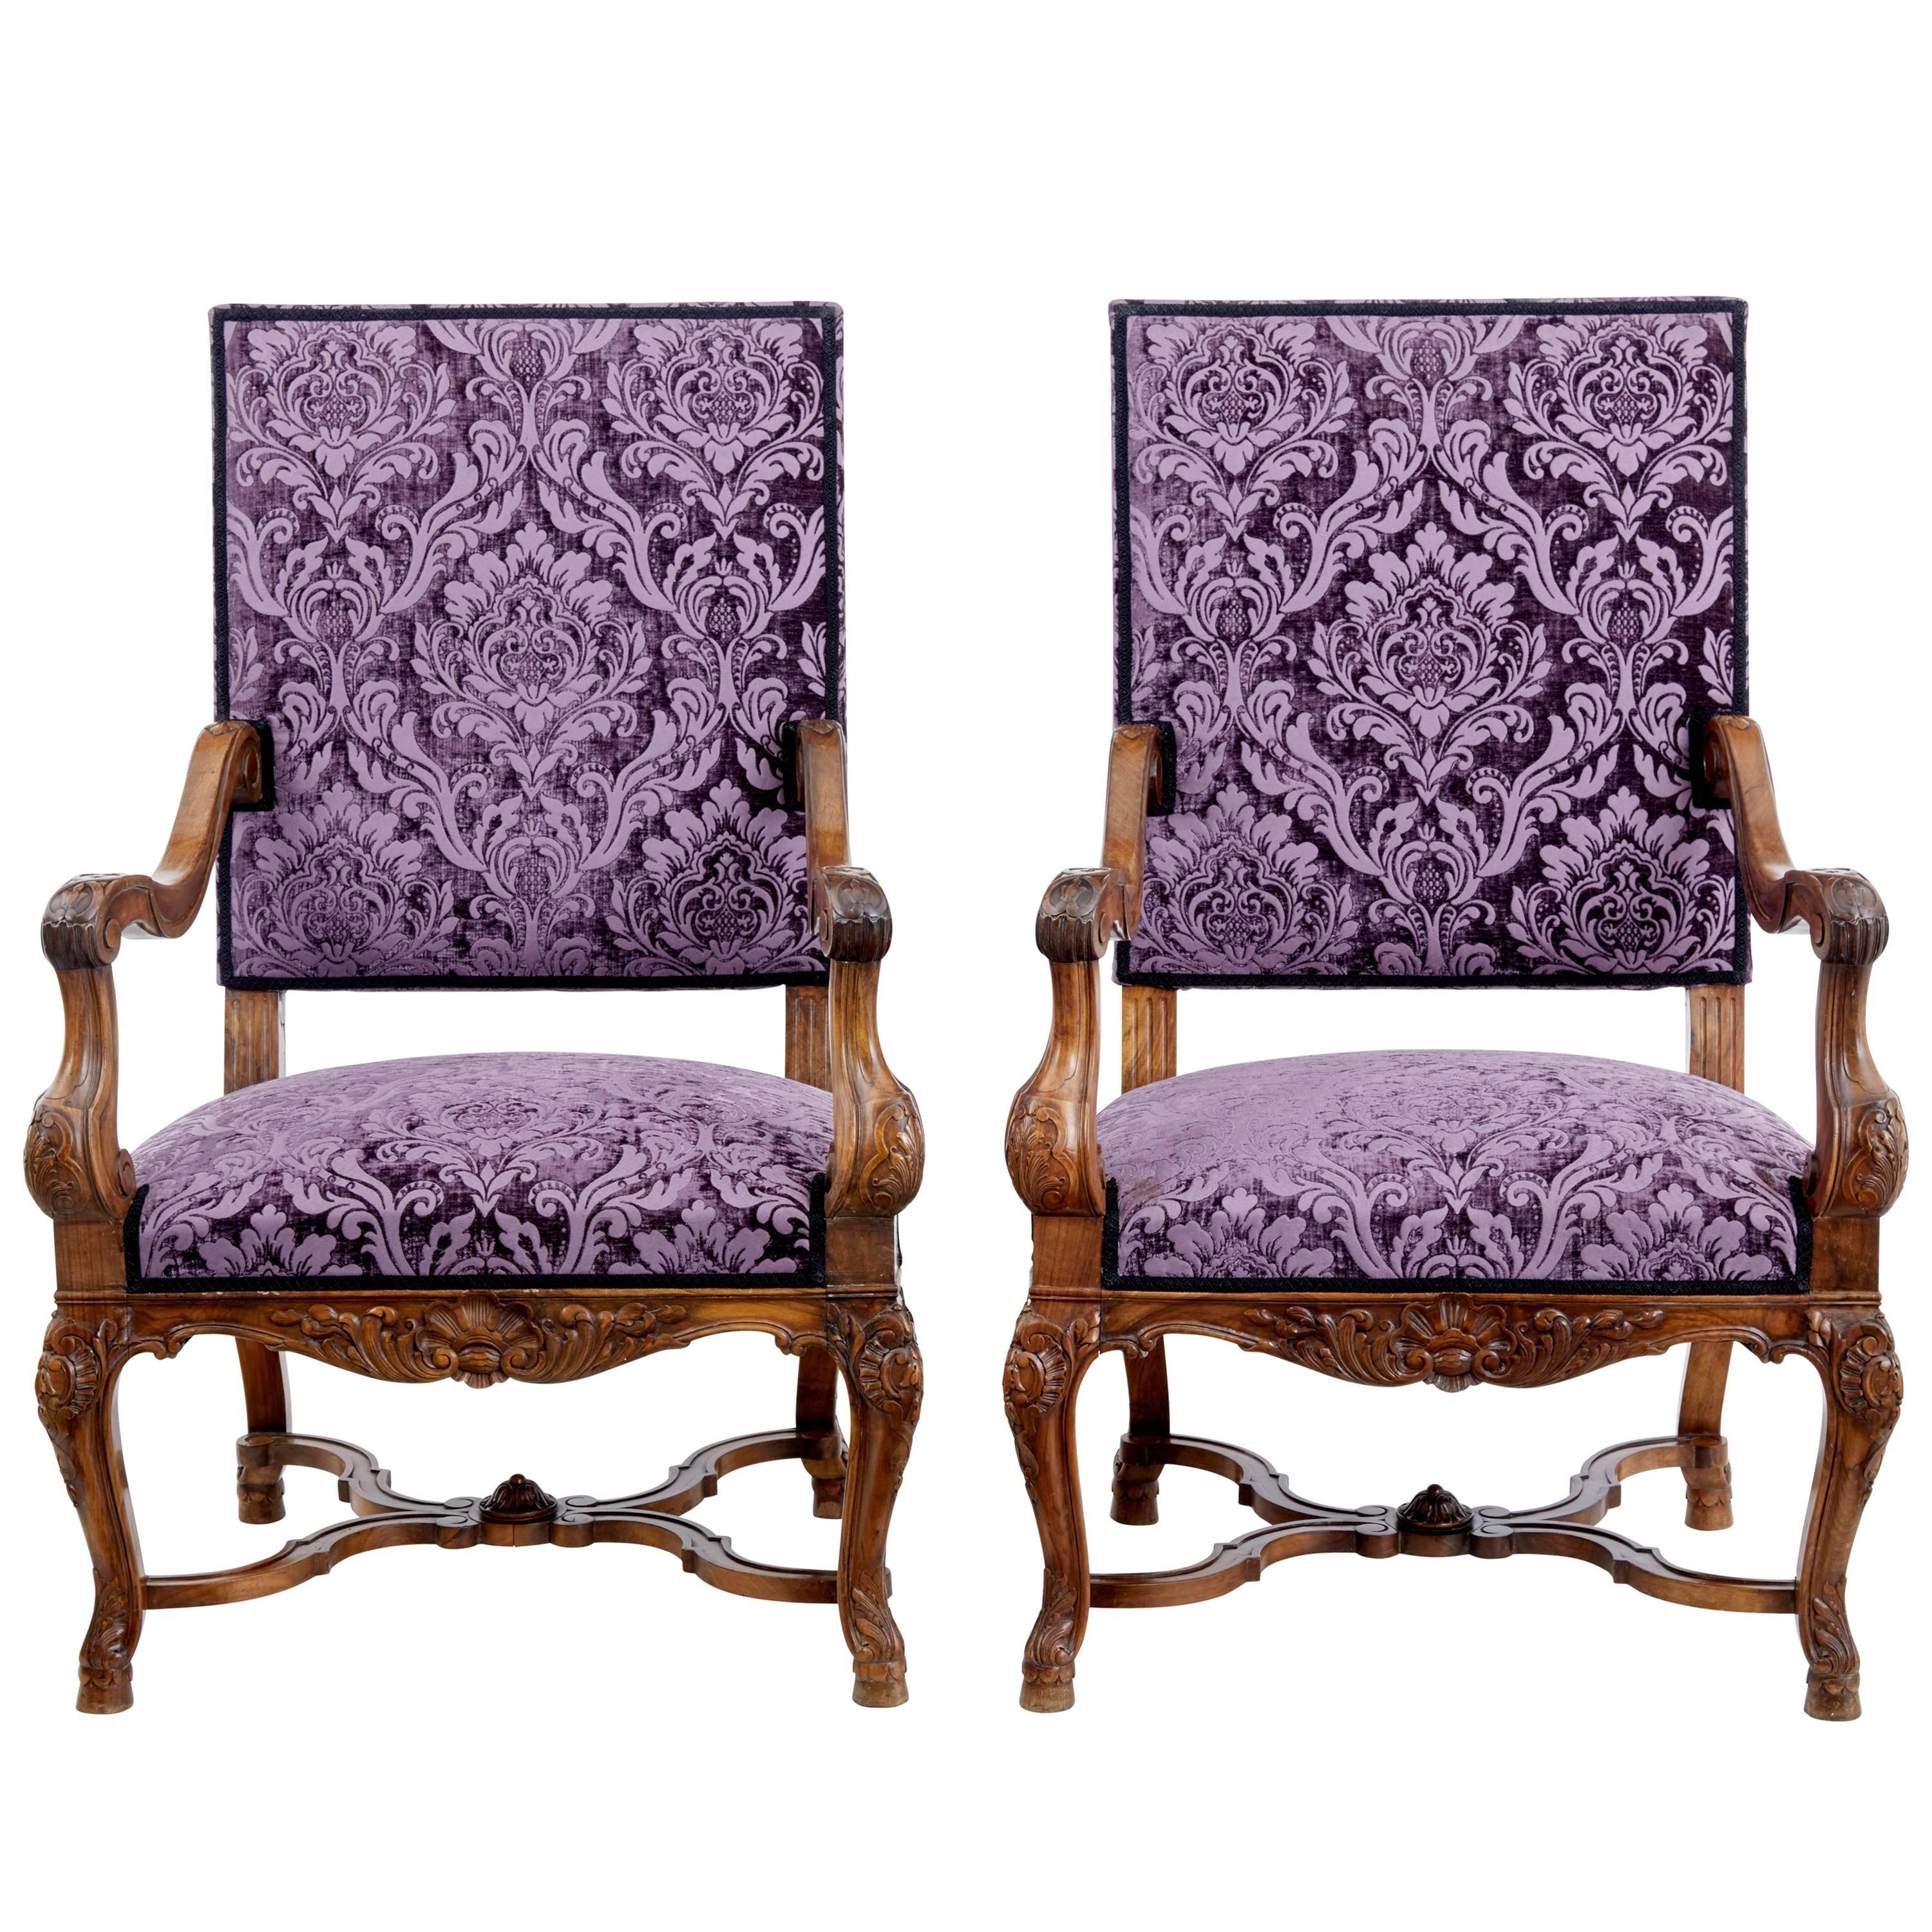 Pair of 19th Century French Walnut Art Nouveau Armchairs